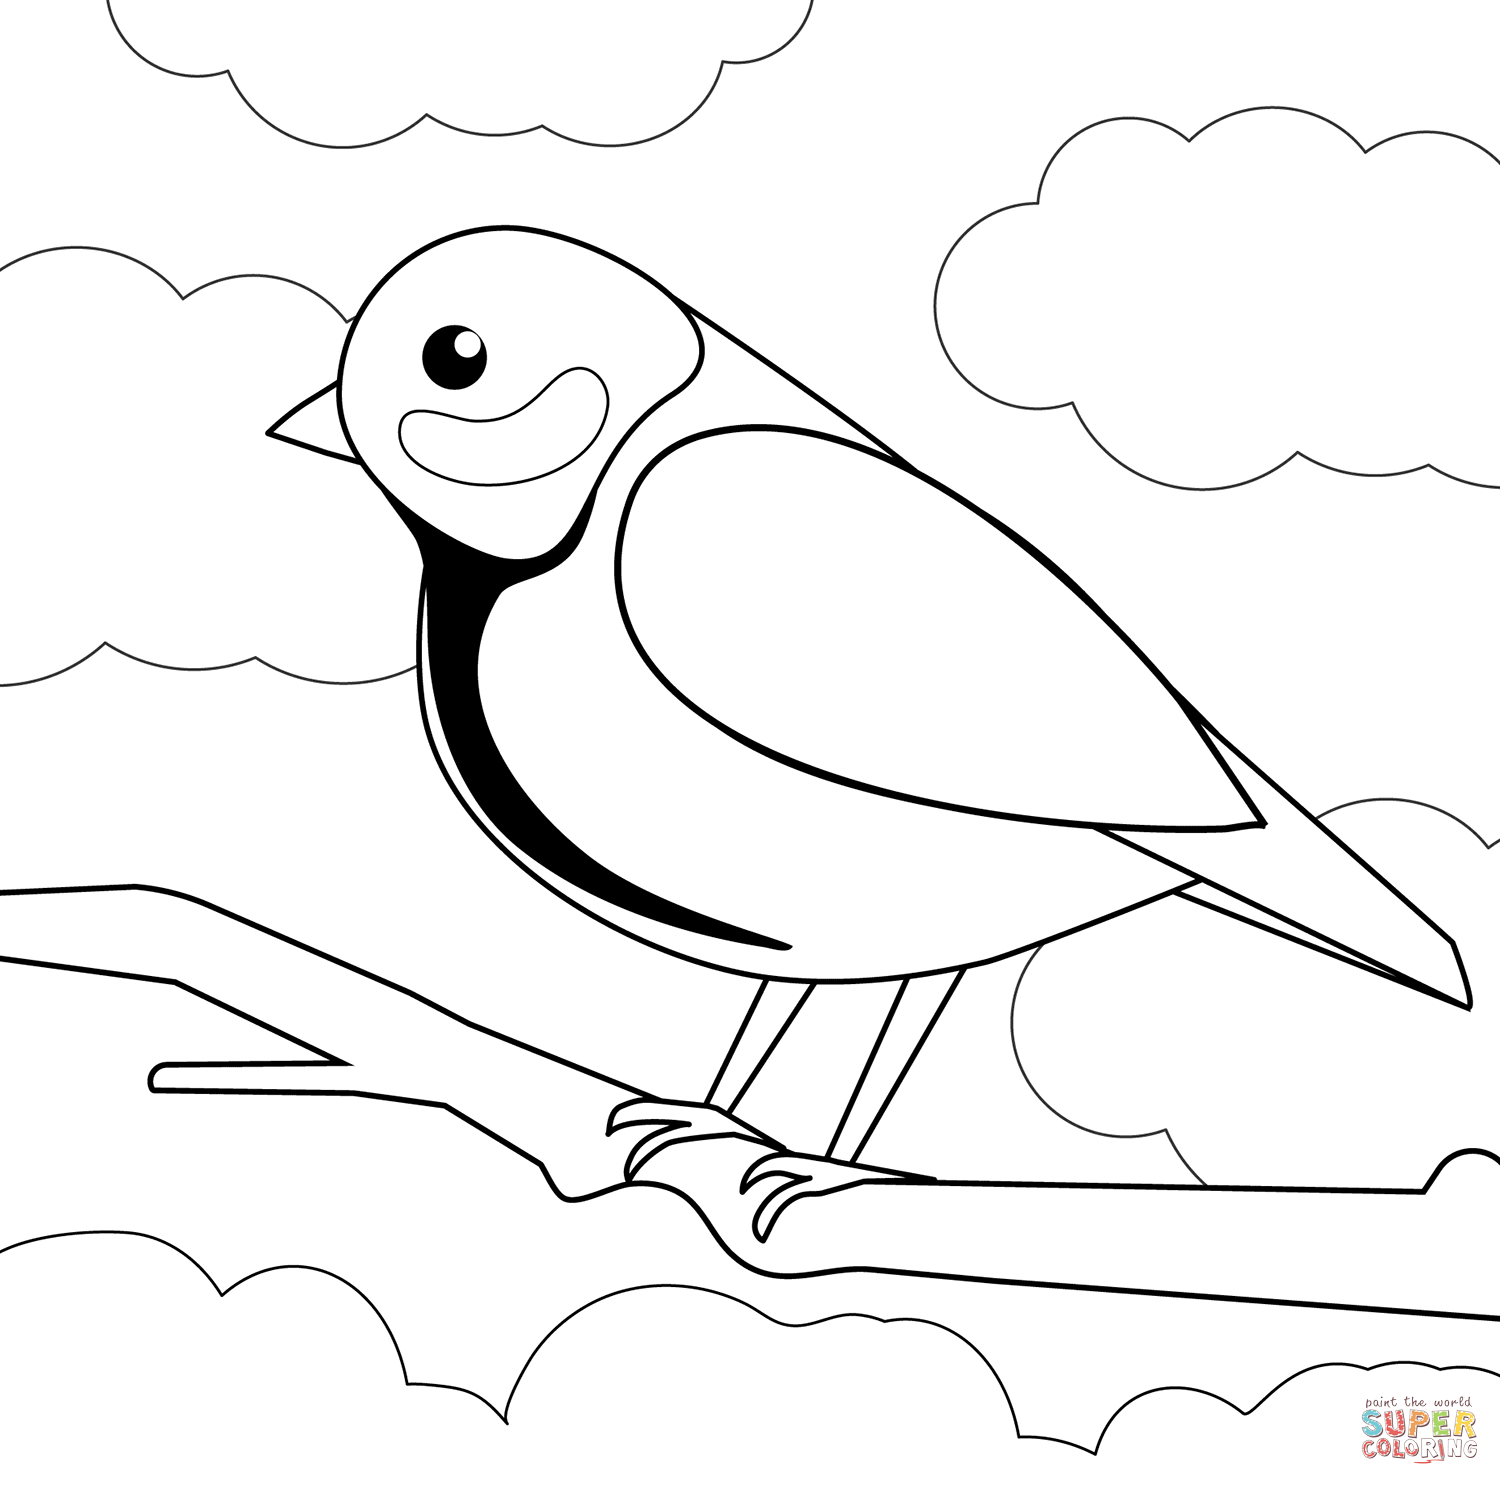 Tit coloring page free printable coloring pages